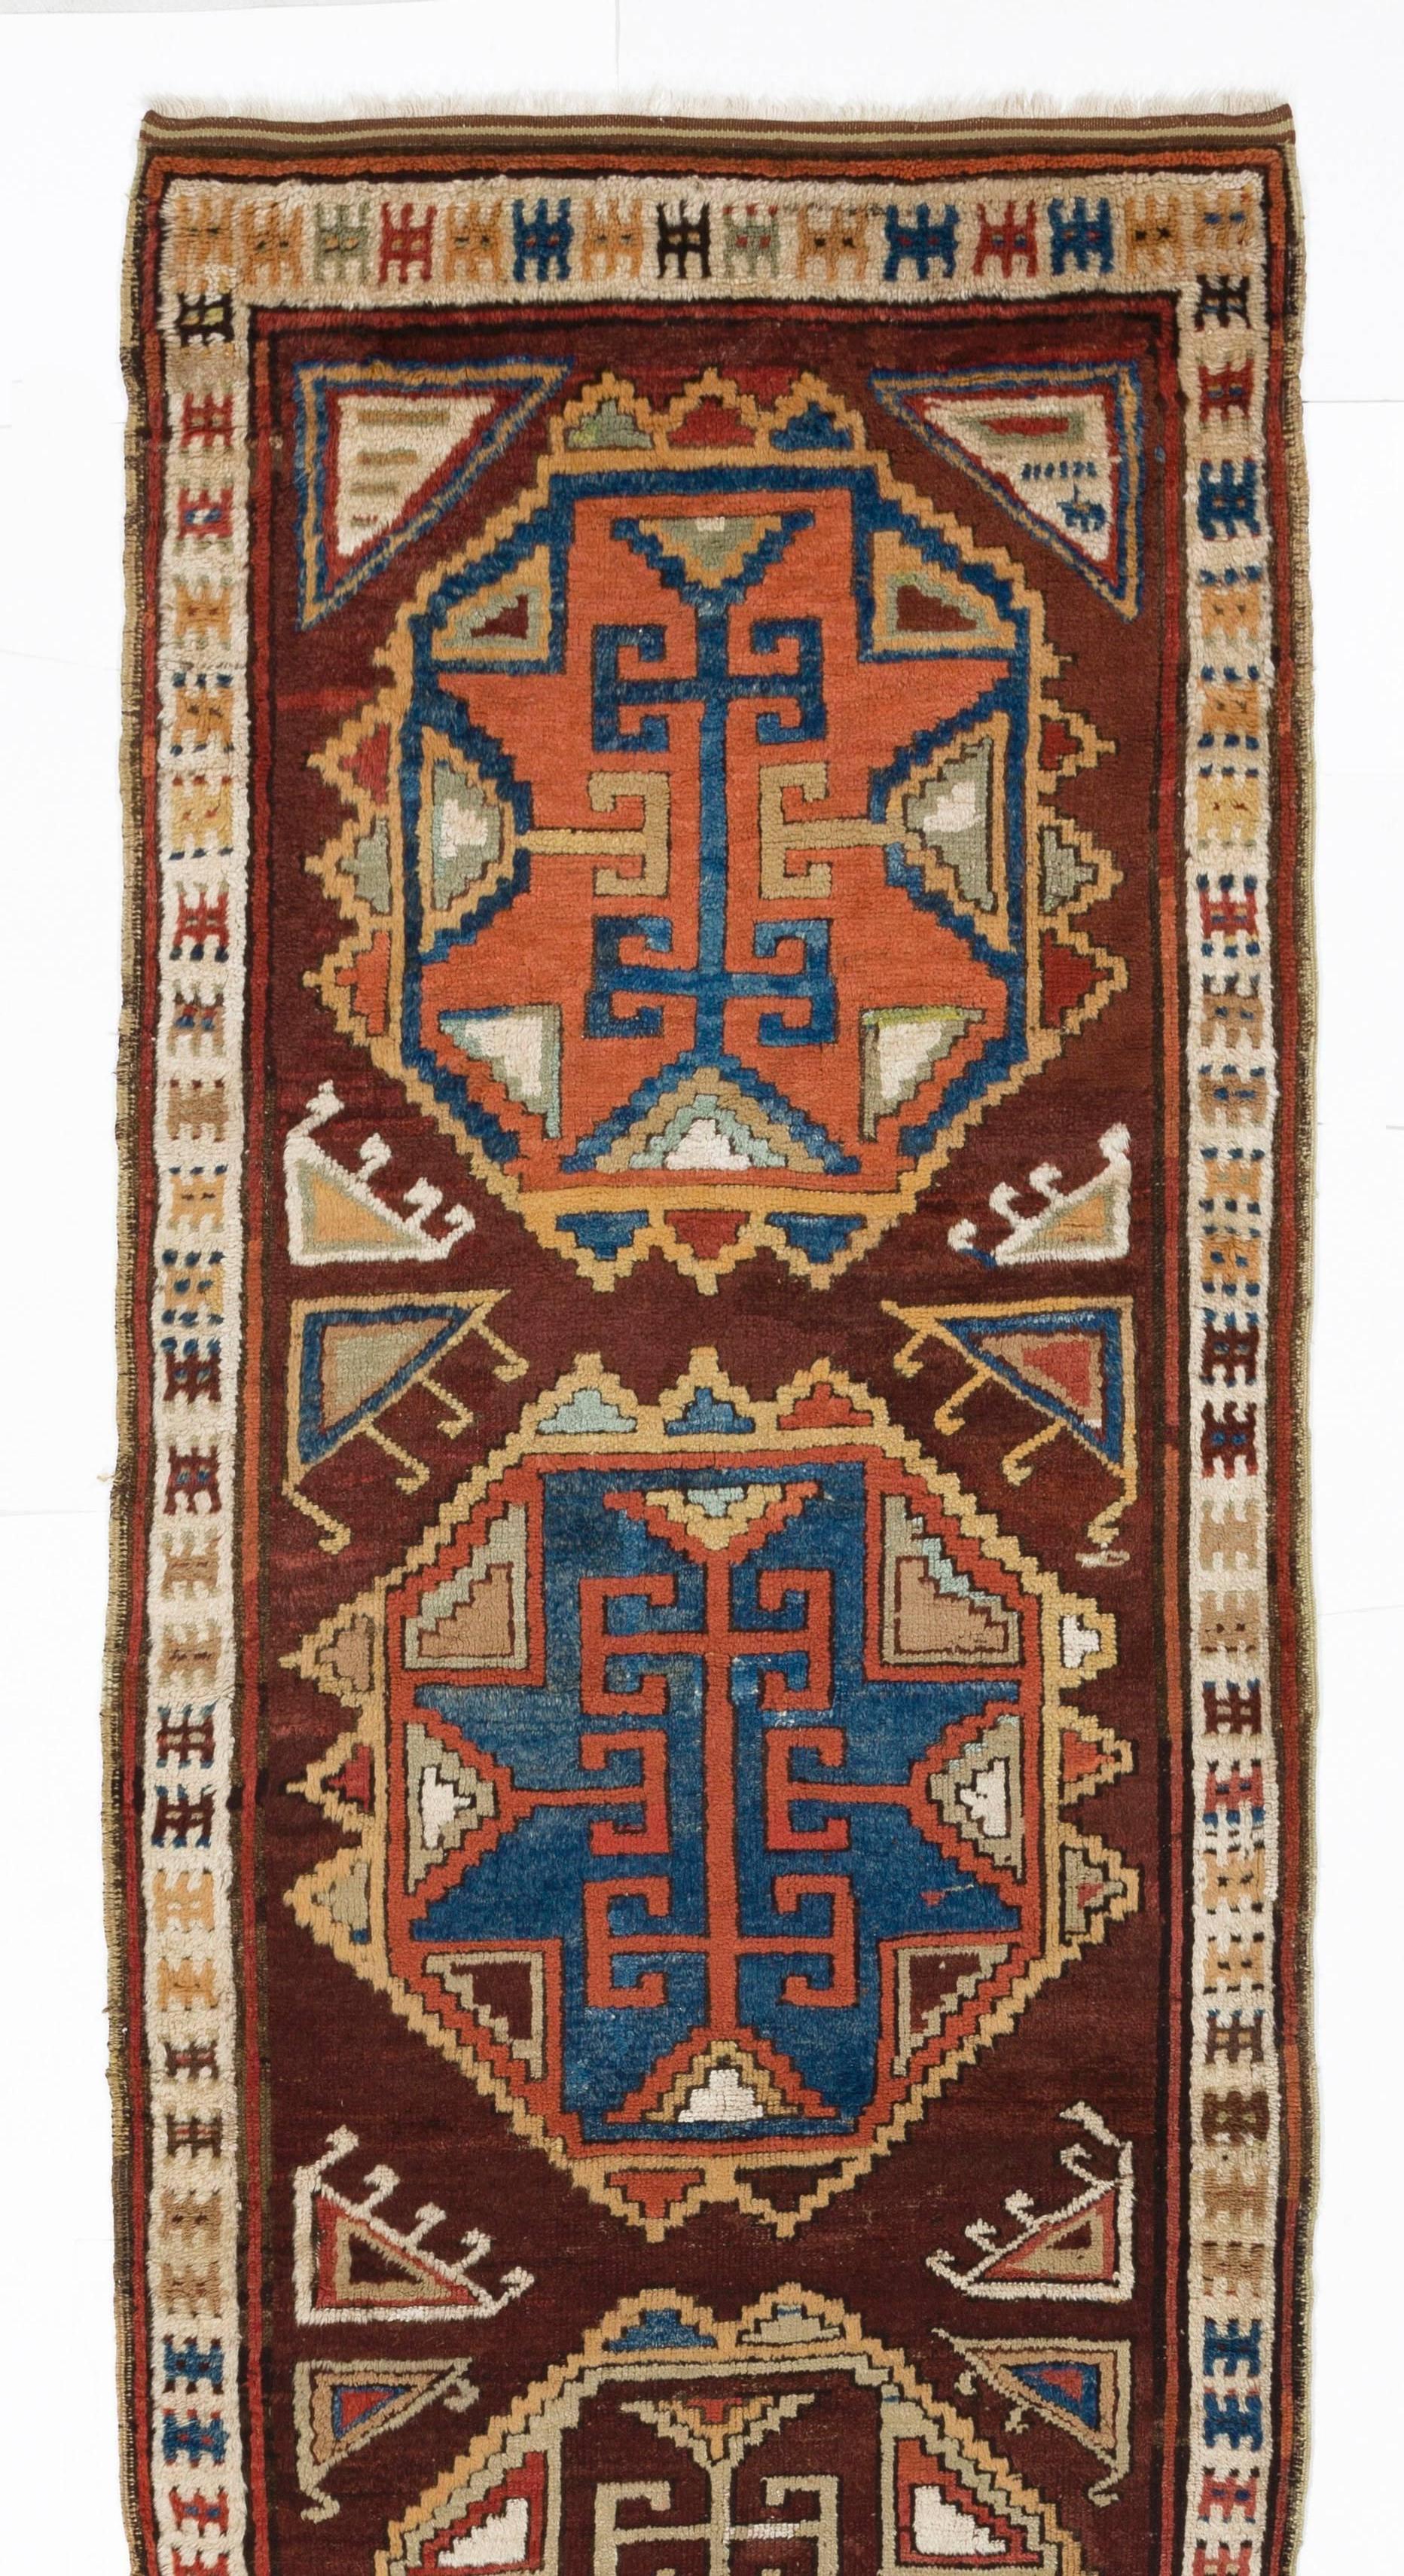 Antique Central Anatolian Konya runner carpet. Finely hand-knotted with even medium wool pile on wool foundation. Good condition. Sturdy and as clean as a brand new rug (deep washed professionally). Measures: 3.7 x 11.7 ft.